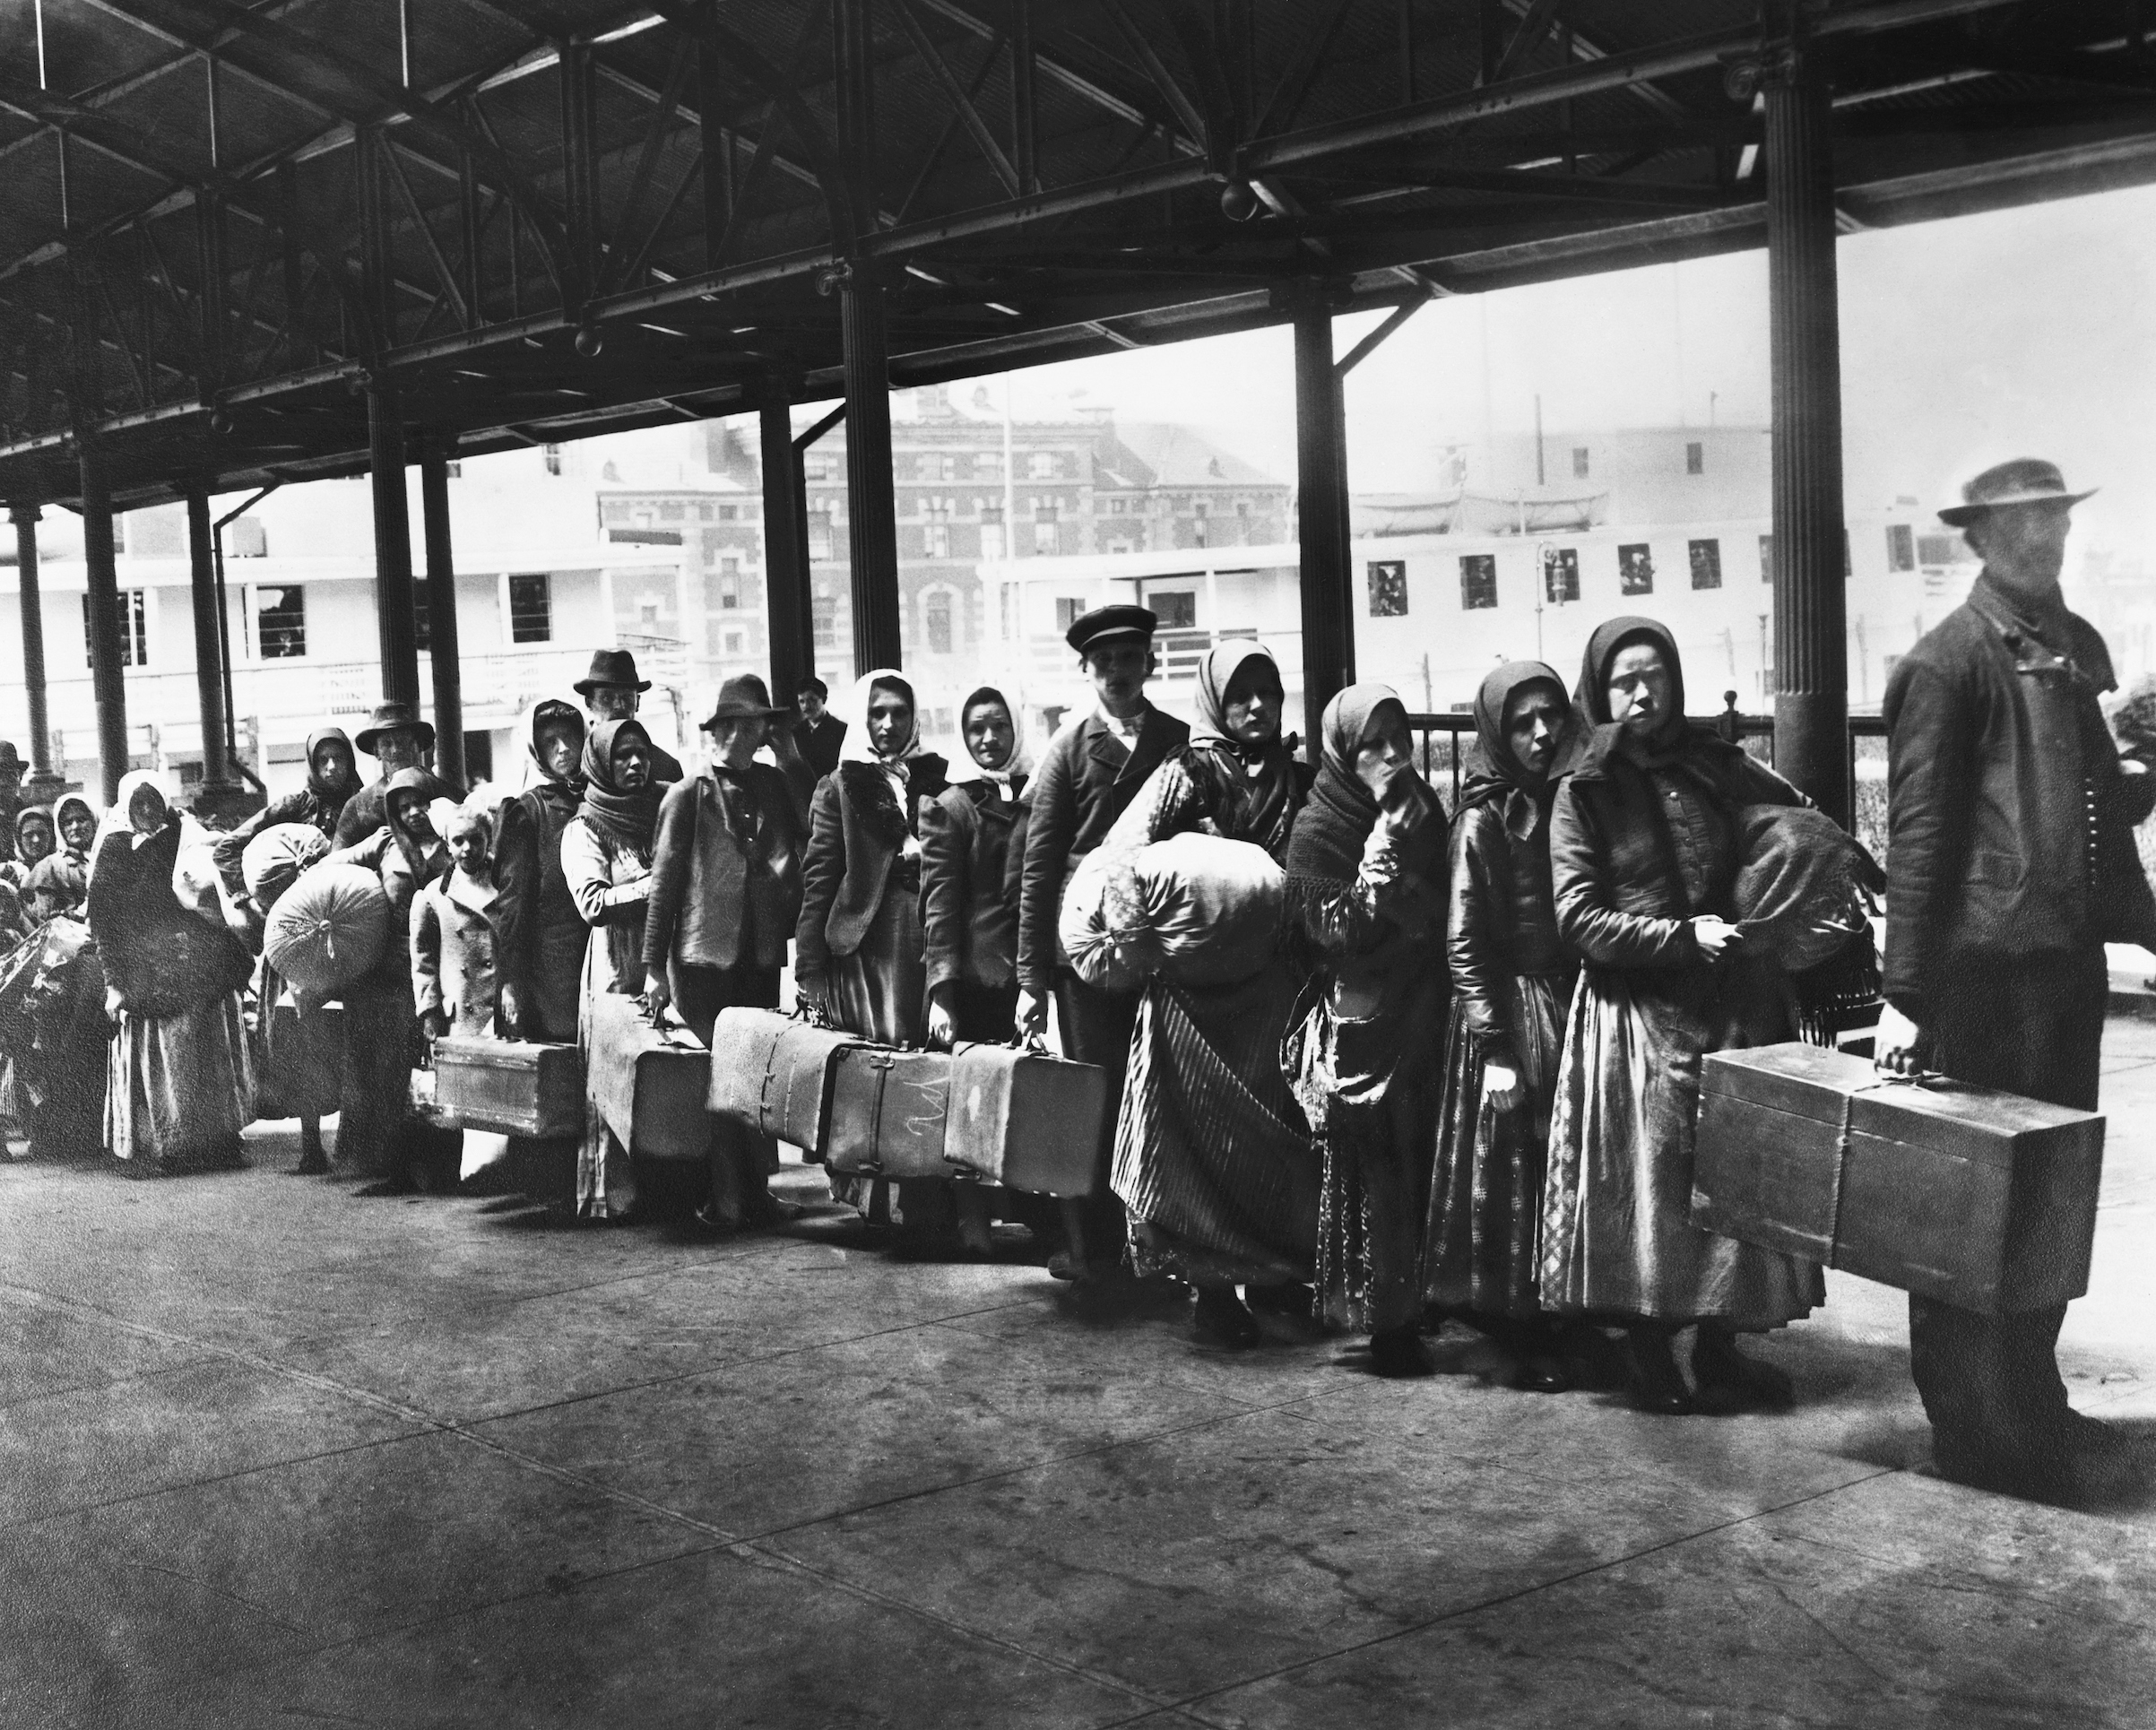 Immigrants on line leaving Ellis Island waiting for ferry to N.Y., ca 1900. (Bettmann / Getty Images)